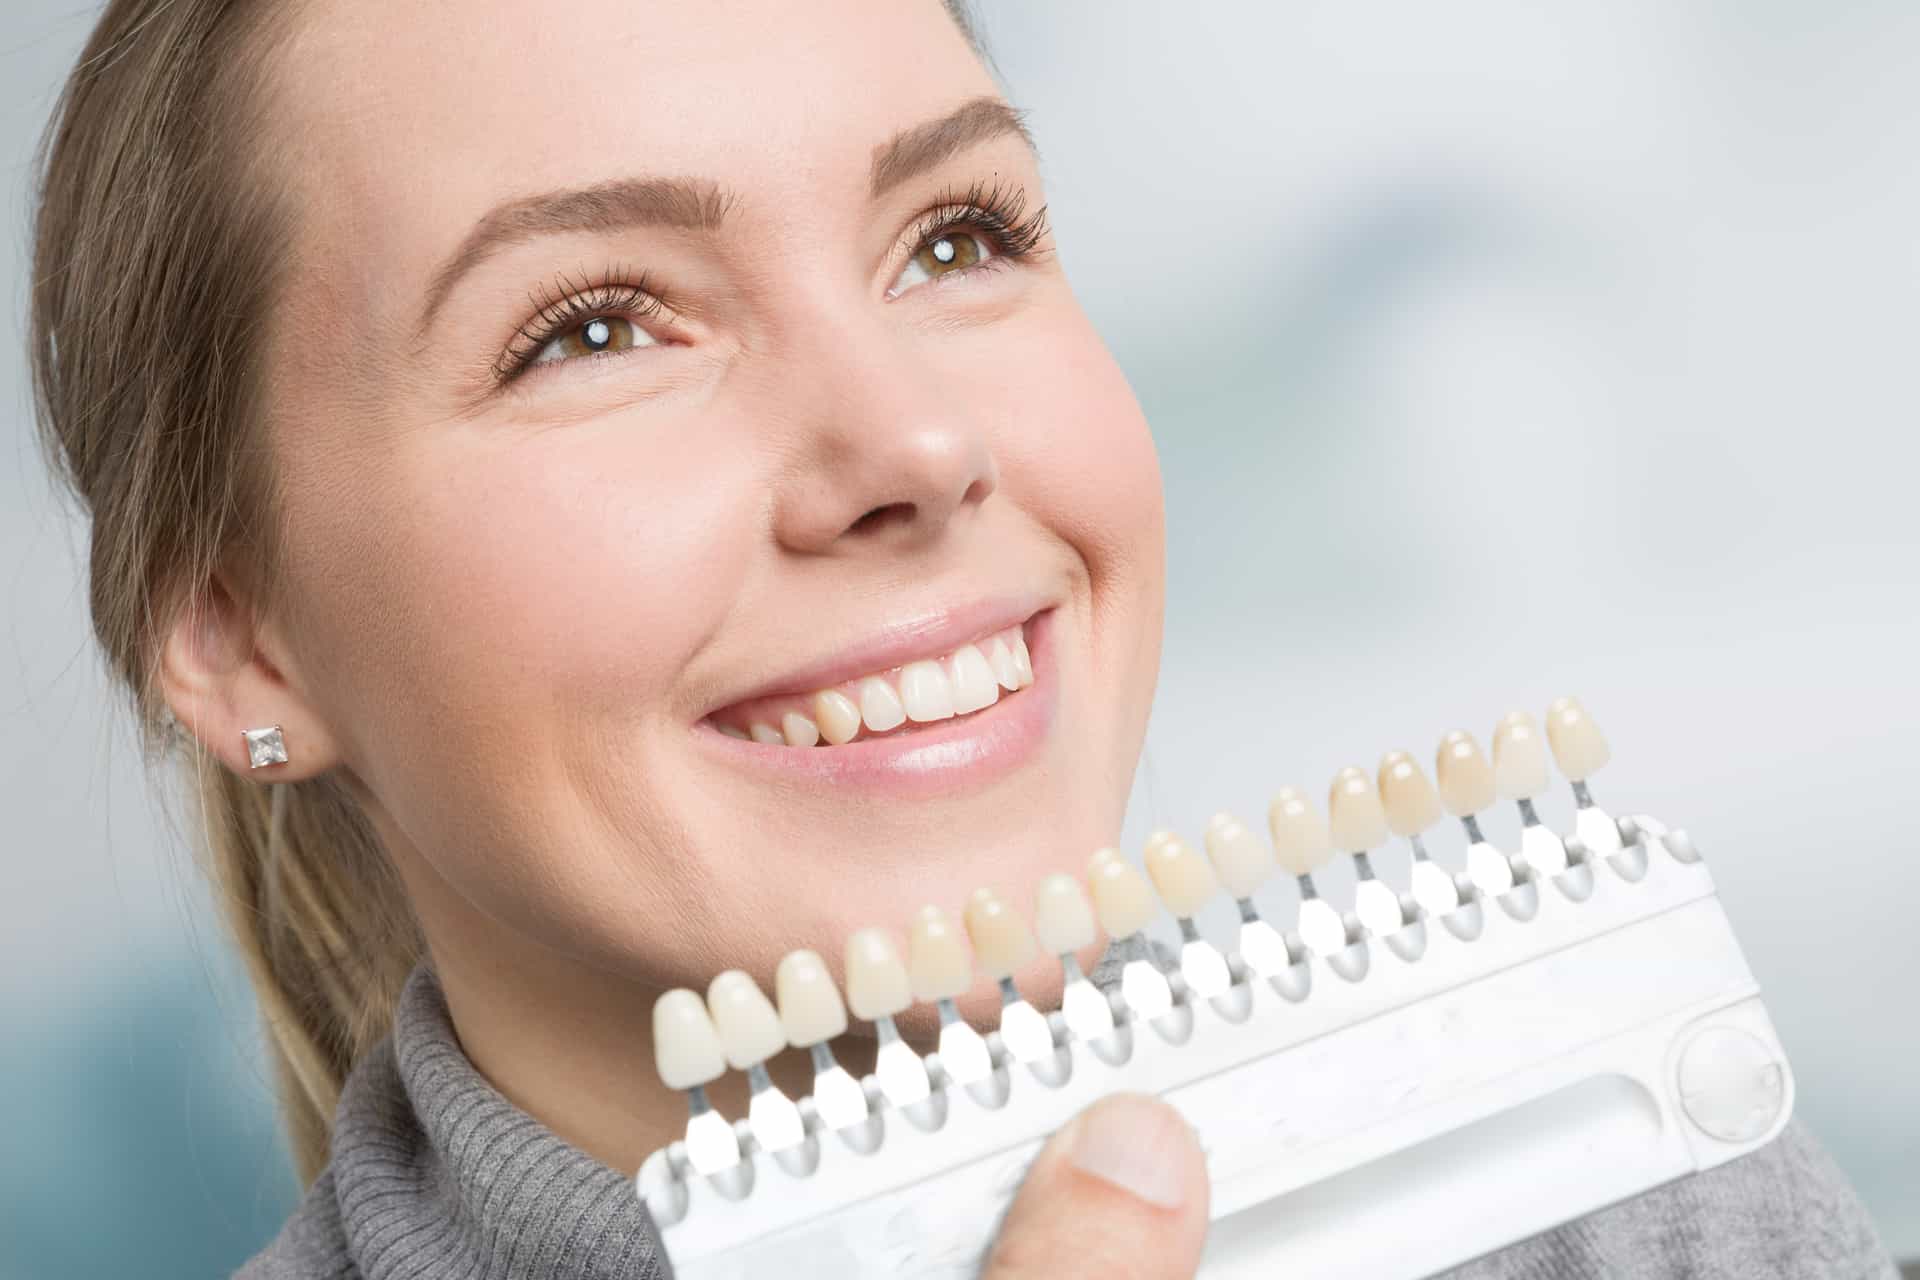 Veneers showing the concept of Services